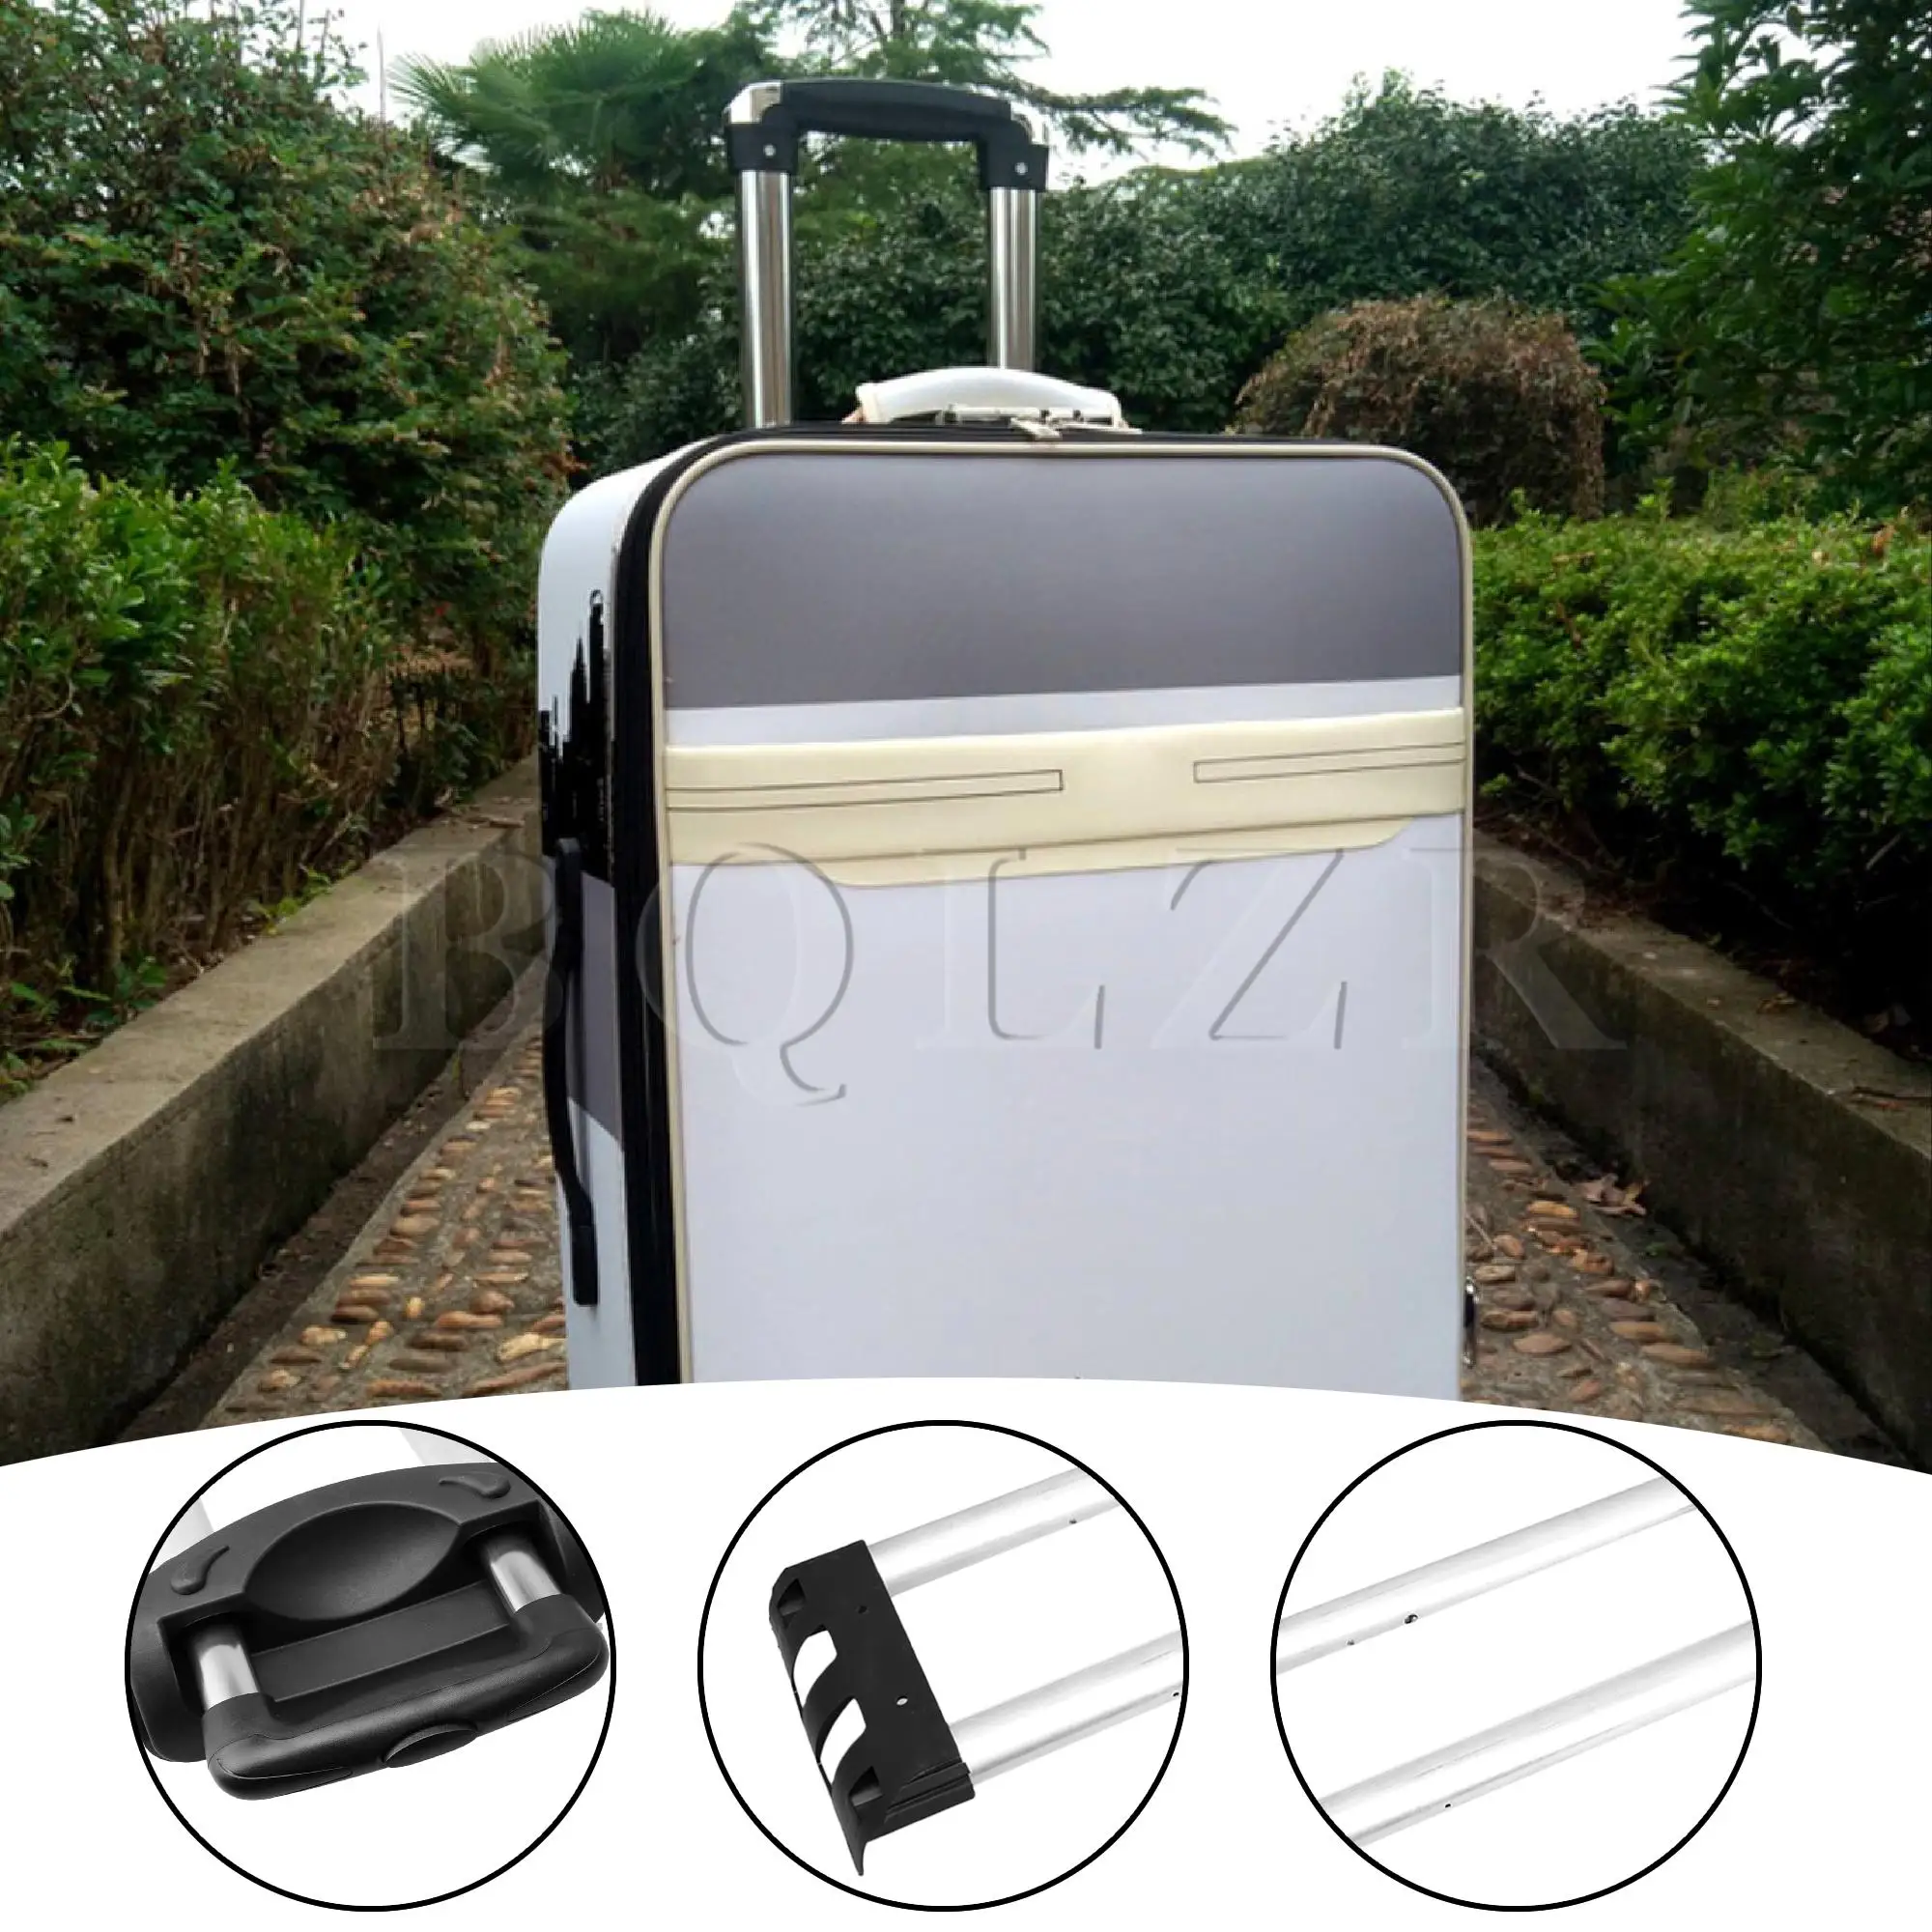  BQLZR R003 DIY Plastic 20 inch Traveling Luggage Telescopic Handle  Replacement Repair Parts Suitcase Aluminium Alloy Pull Out Rod Heavy Loads  : Clothing, Shoes & Jewelry